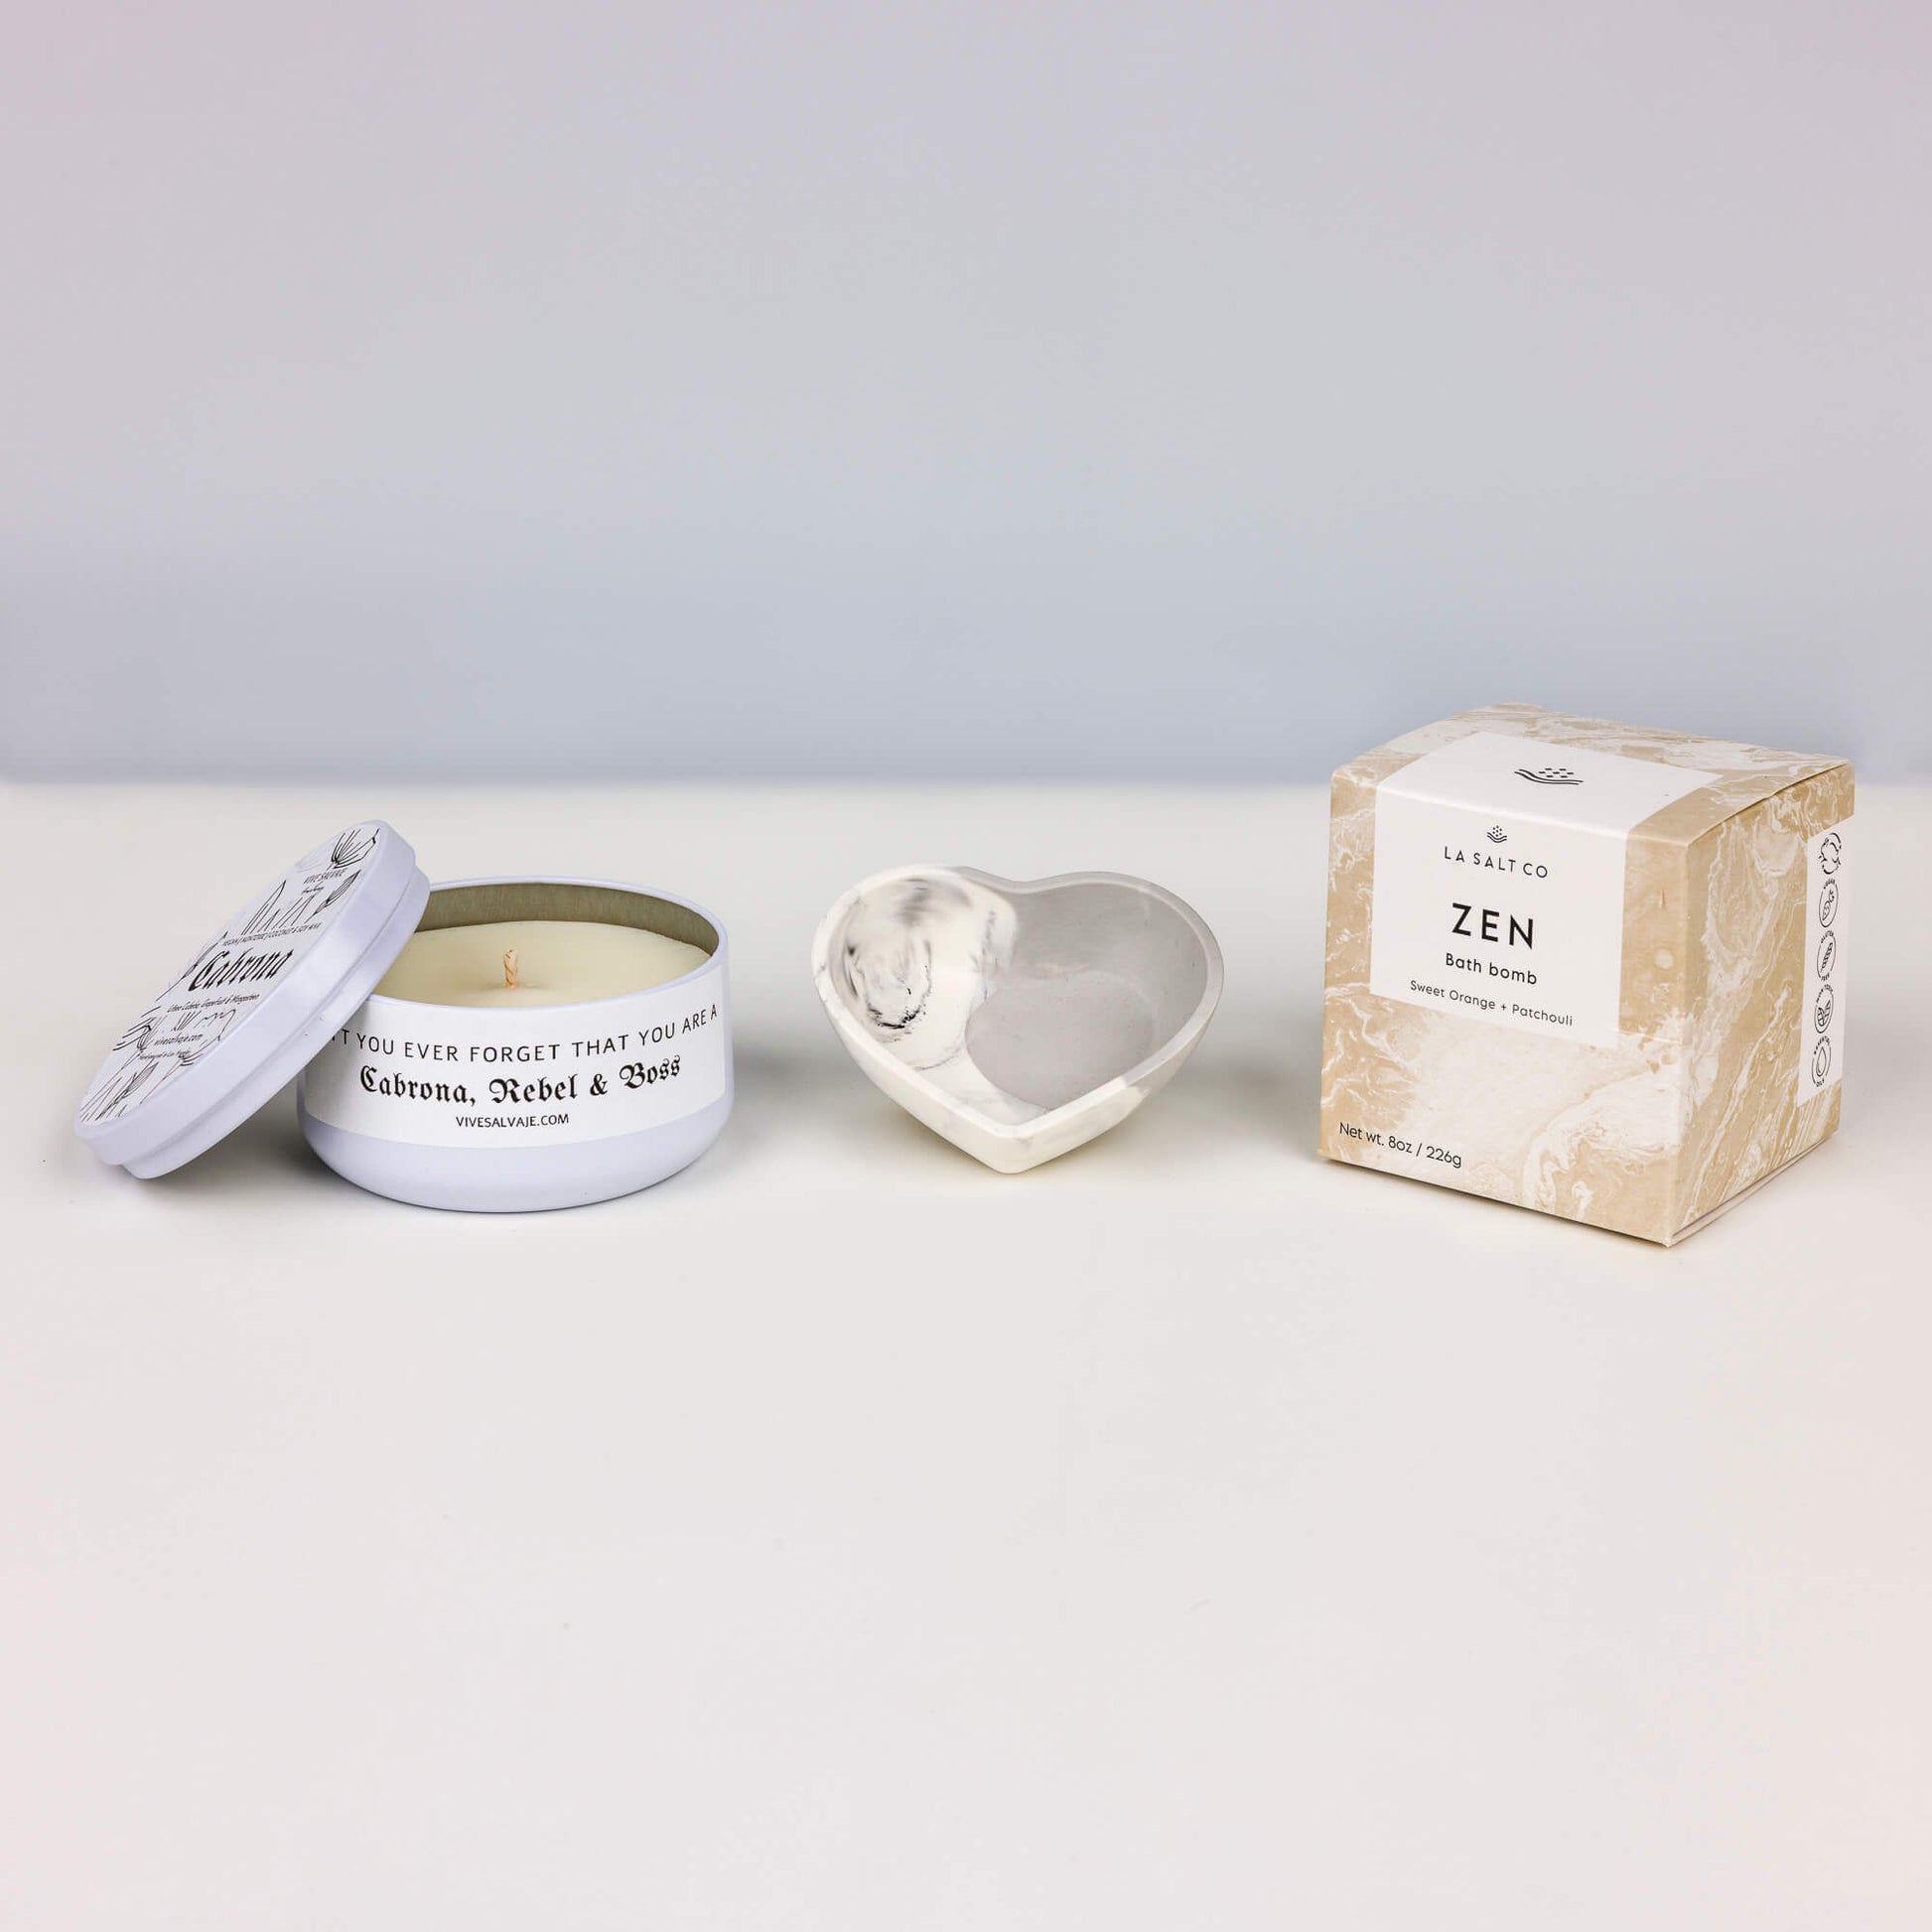 The contents of the Boss Box, including the Cabrona candle, Zen bath bomb, and heart shaped tray on a white background. 